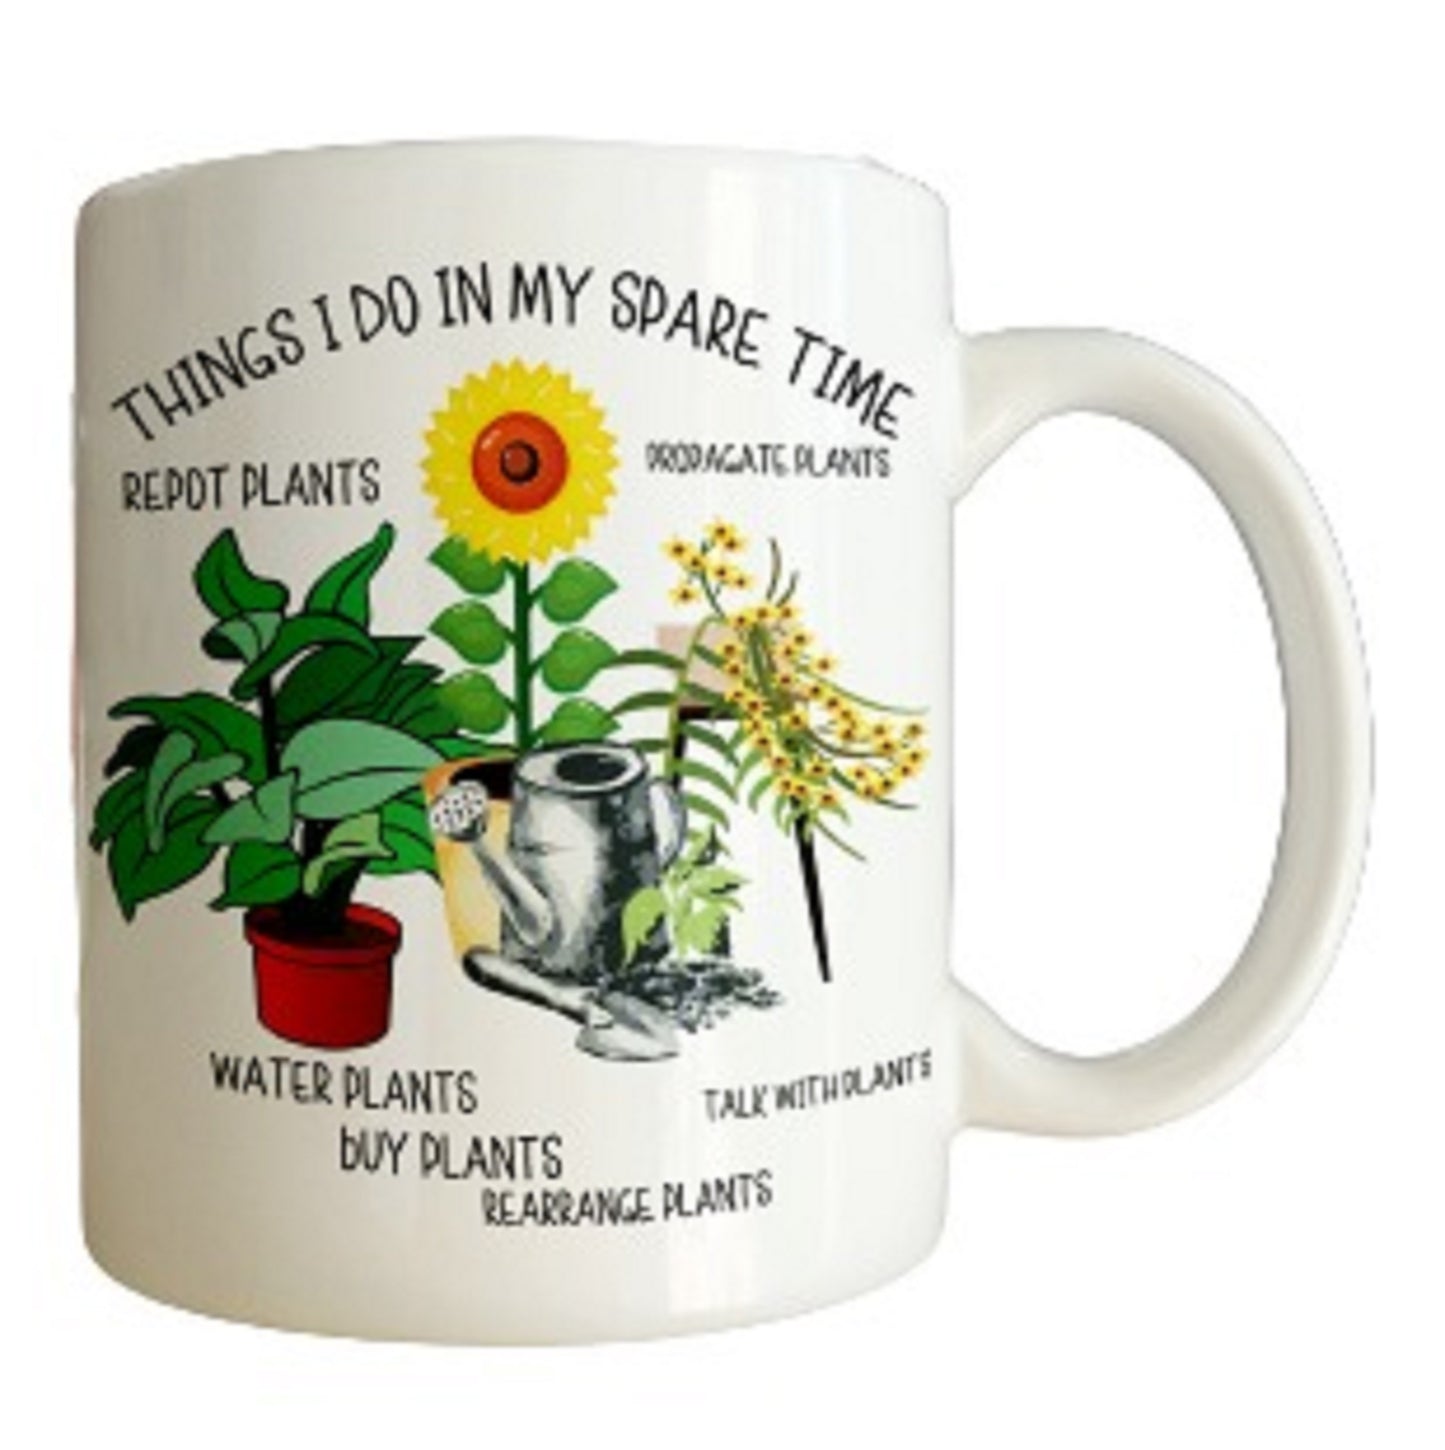  Things To Do In My Spare Time Gardening Mug by Free Spirit Accessories sold by Free Spirit Accessories